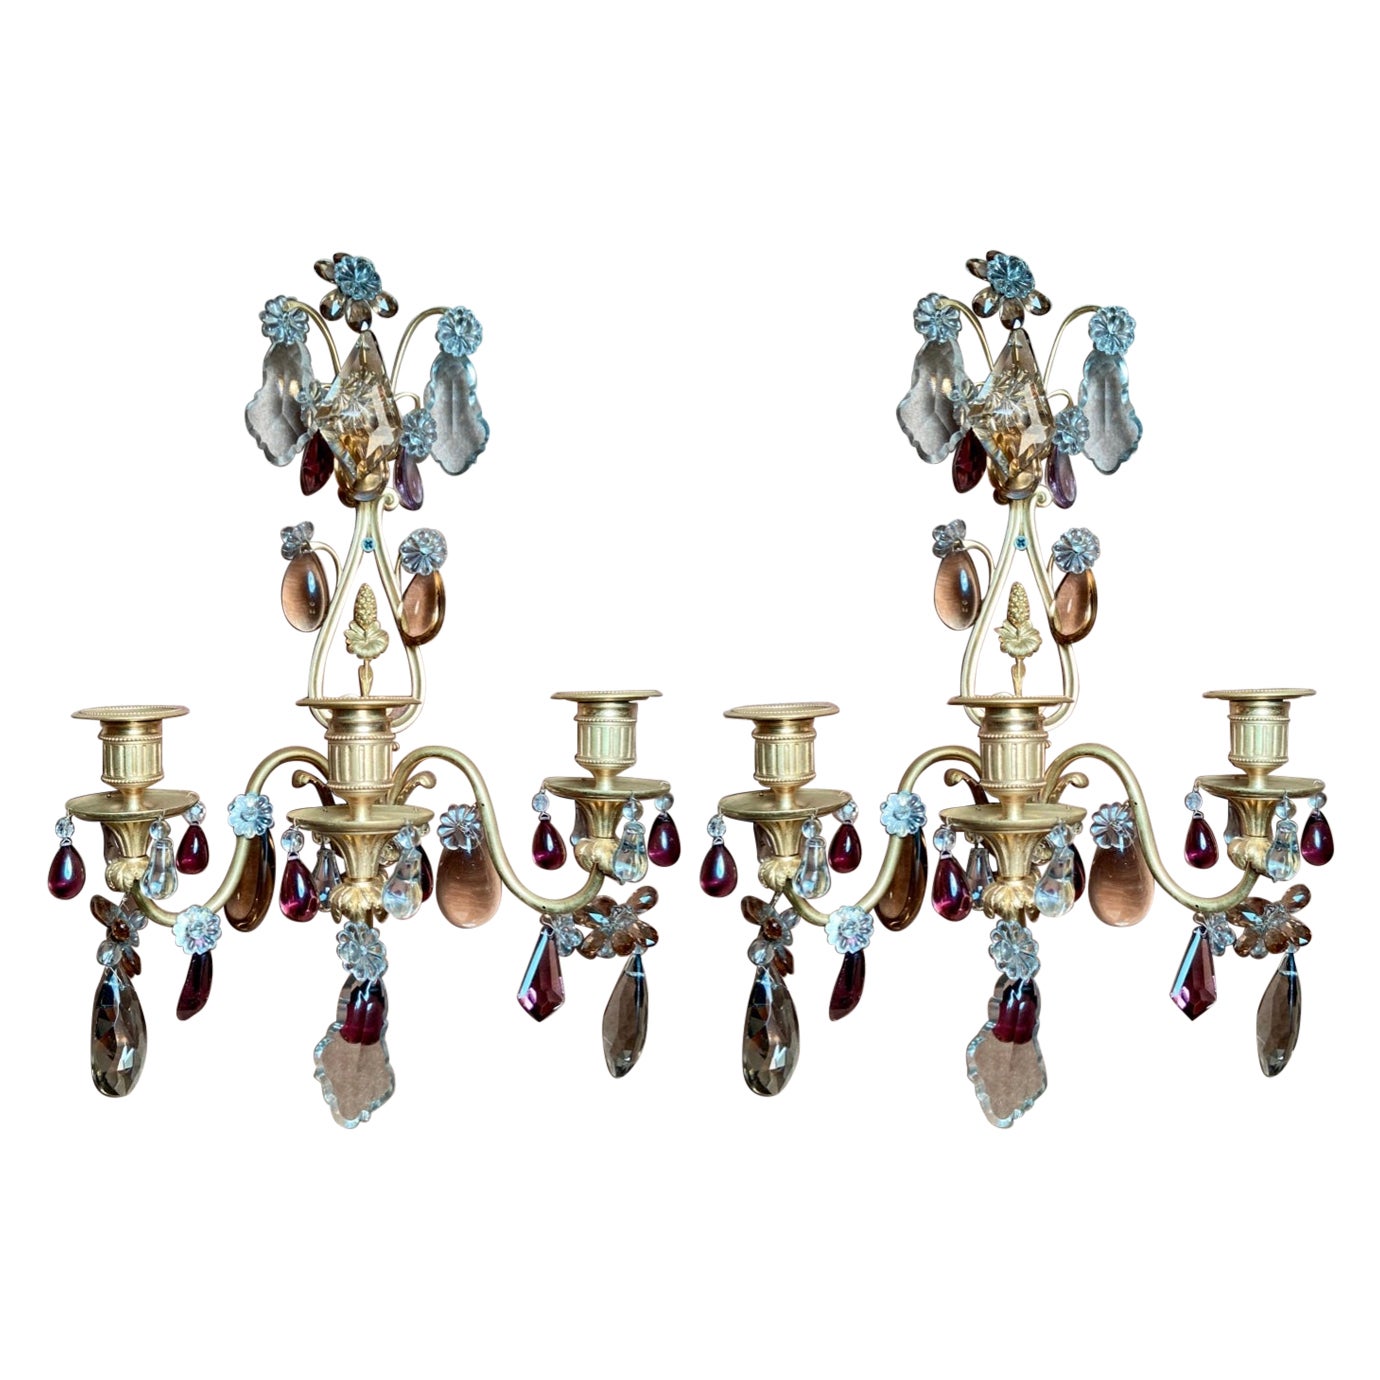 Pair Antique French Ormolu and Baccarat Crystal Wall Lights, circa 1885